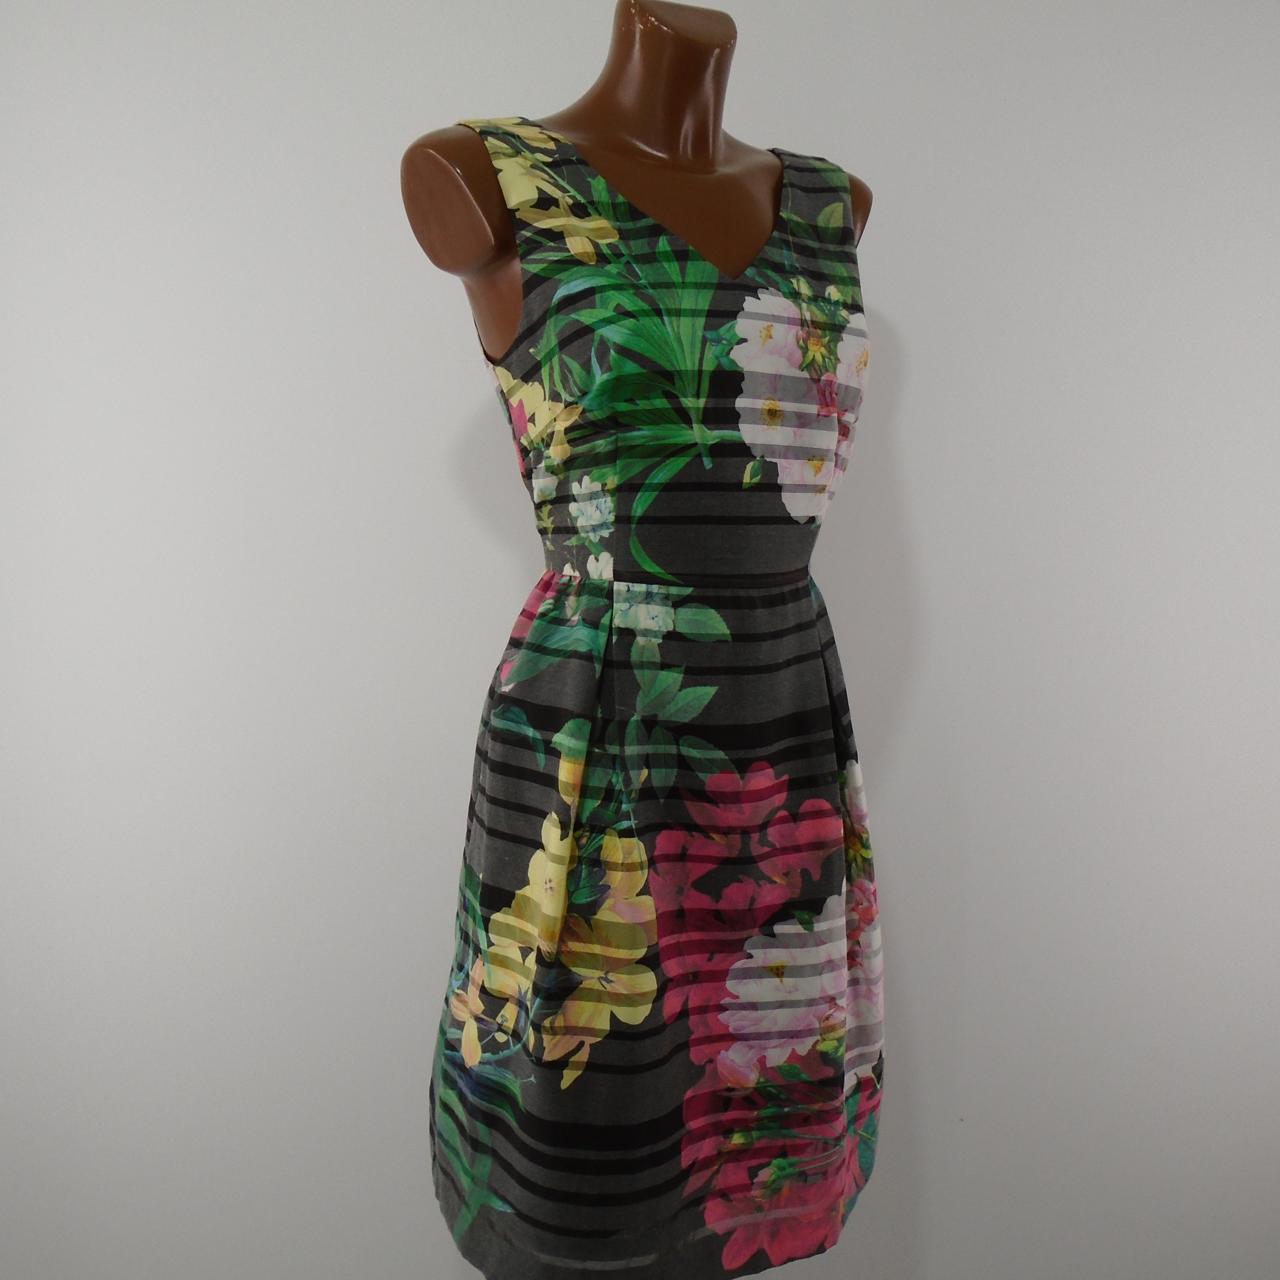 Women's Dress Derhy. Multicolor. M. New without tags